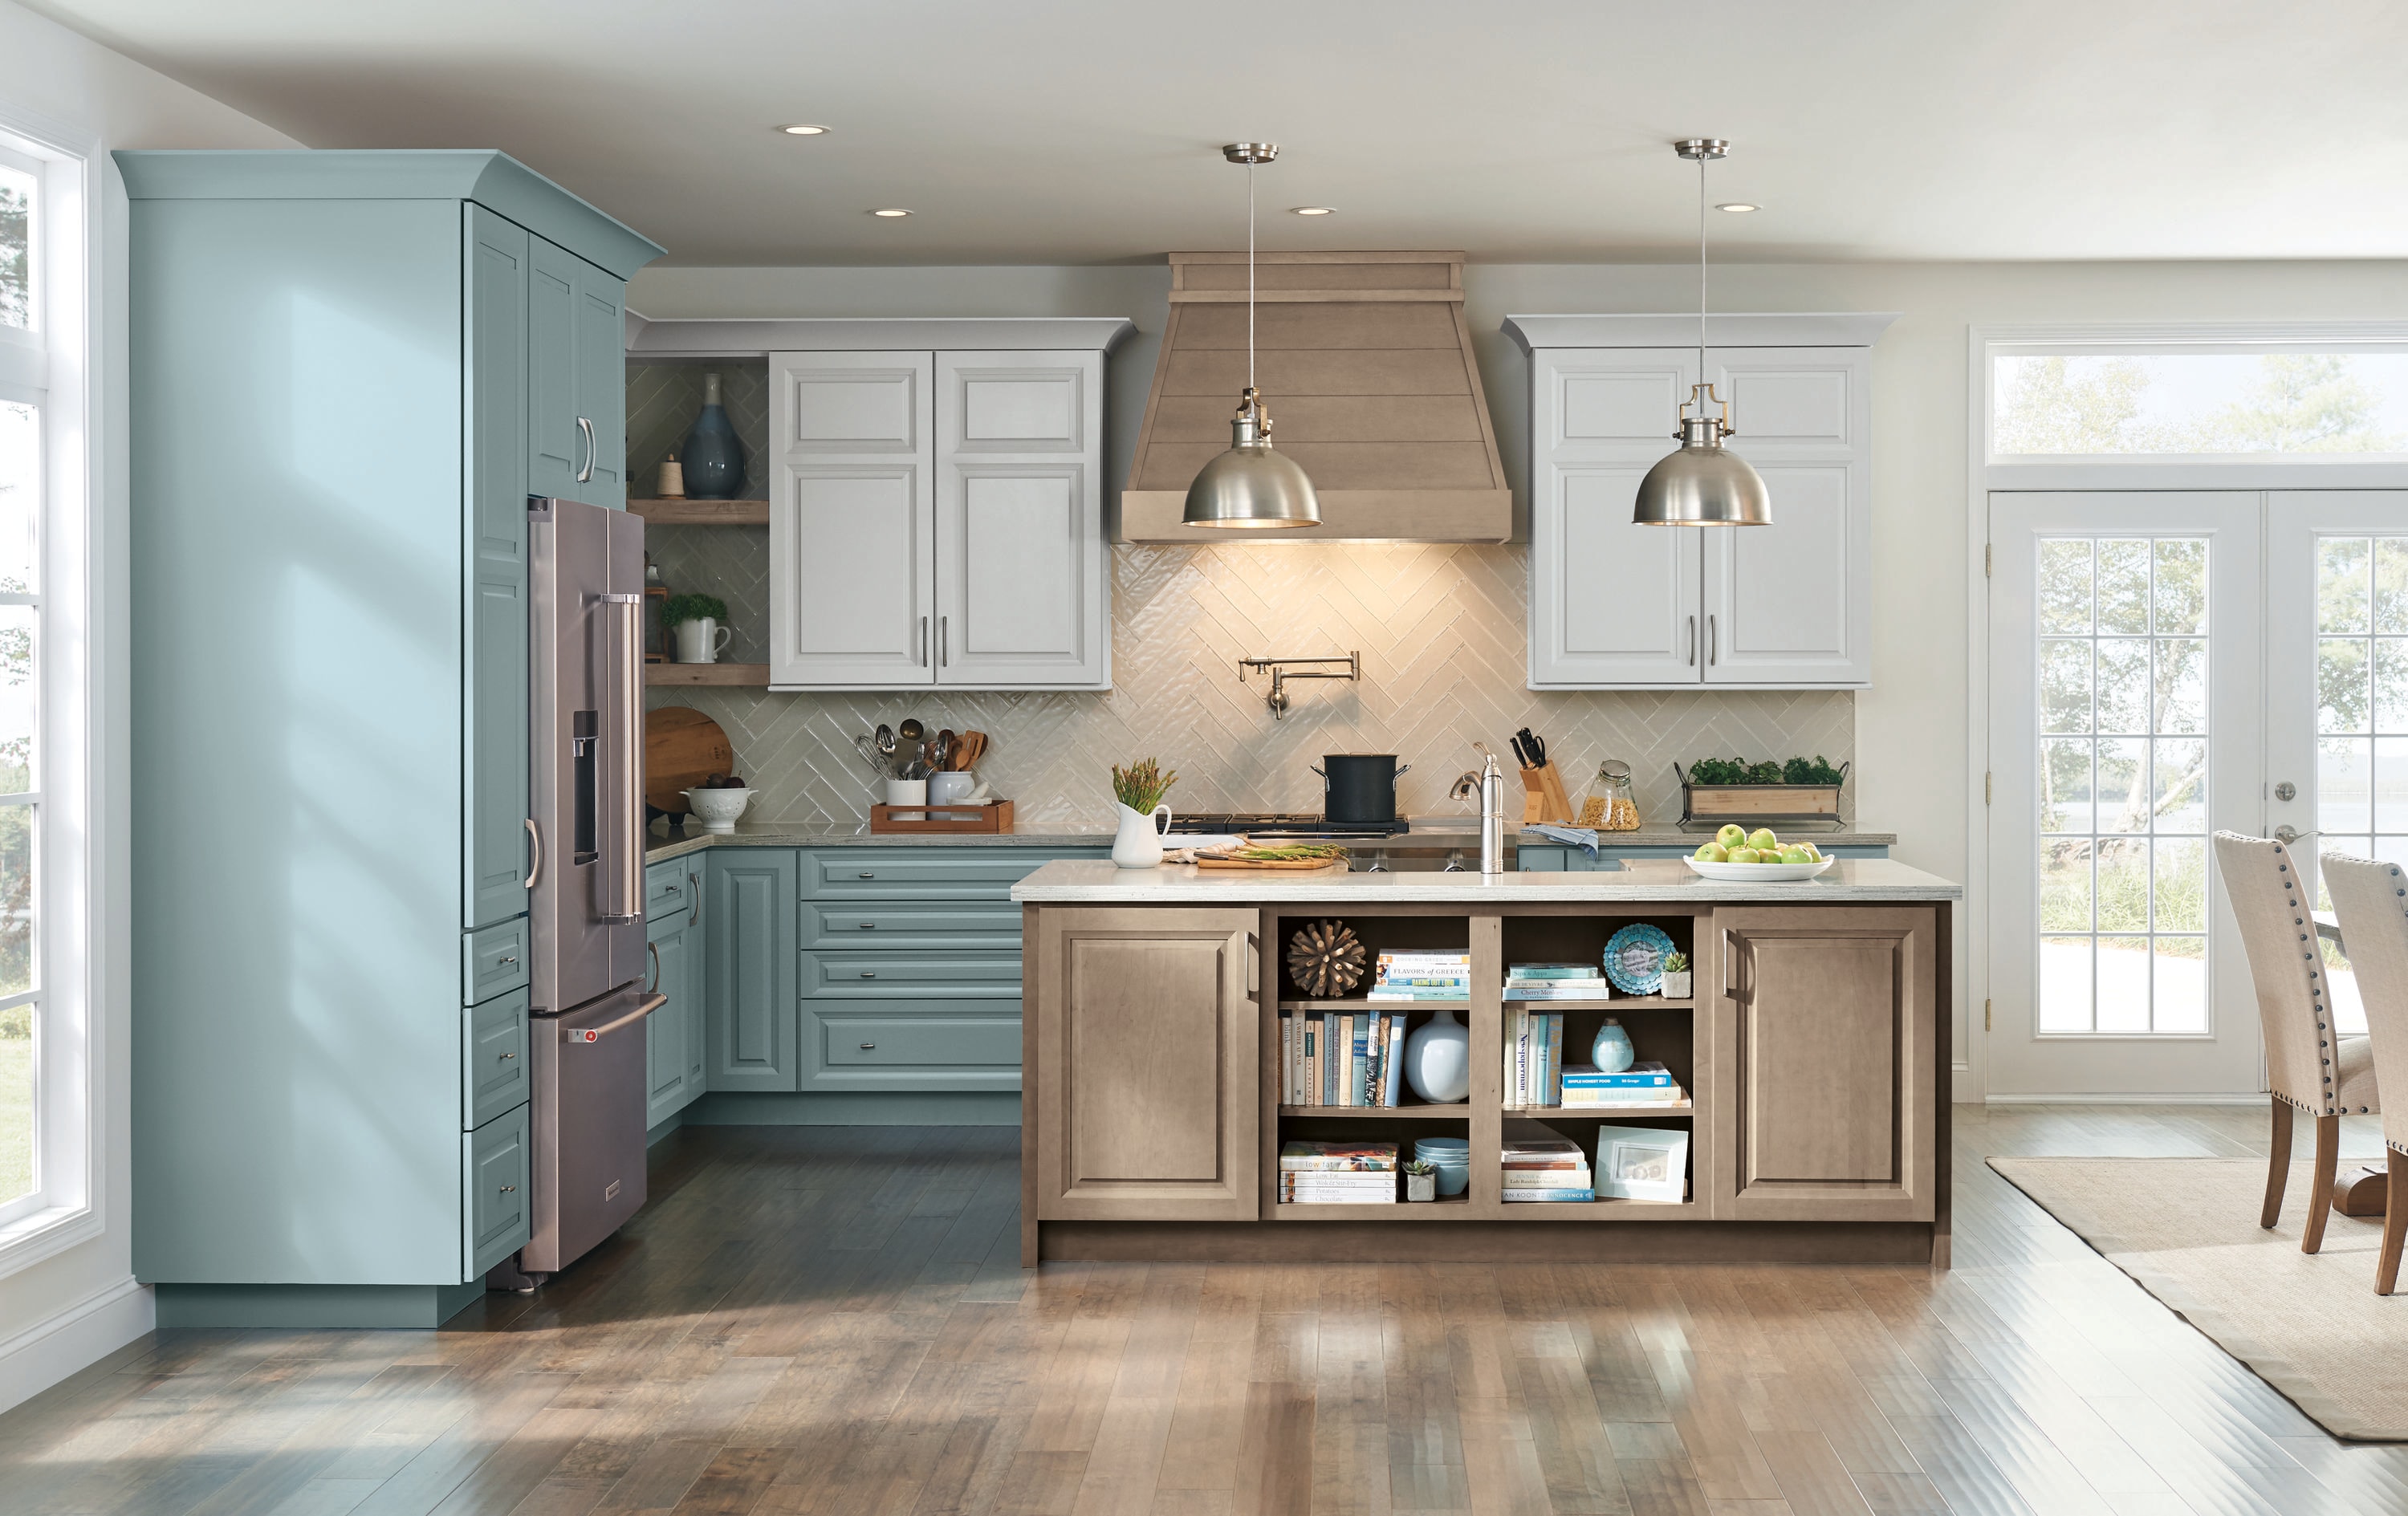 Diamond Jamestown 14.5-in W x 14.5-in H Interesting Aqua Painted Wooden  Painted Maple Kitchen Cabinet Sample (Door Sample) in the Kitchen Cabinet  Samples department at